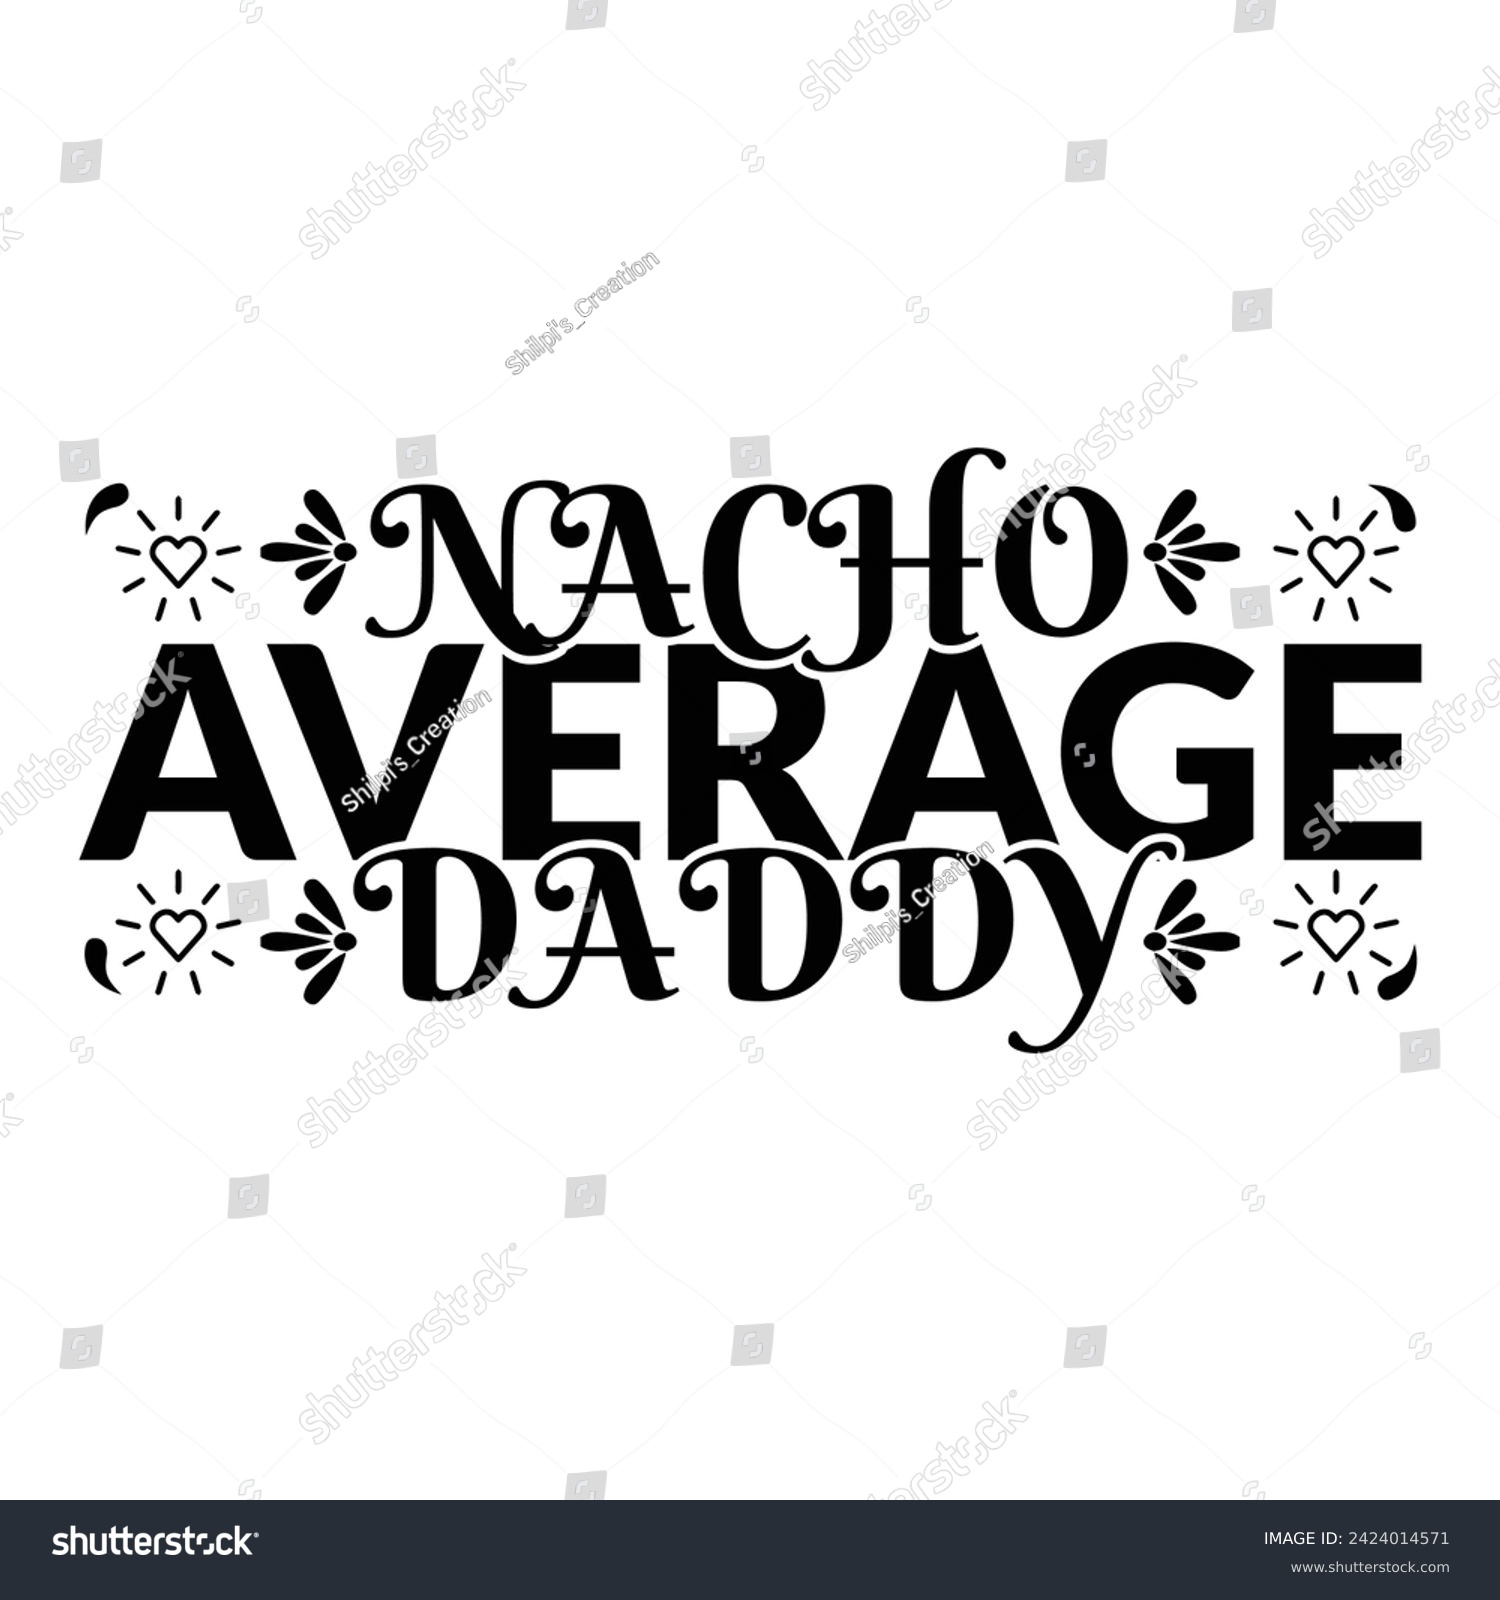 SVG of Nacho Average Dad typography t-shirts design, Father's Day new colourful t-shirts design.nacho average dad - Billboard, Poster, Social Media, Greeting Card template. Vector illustration.
 svg